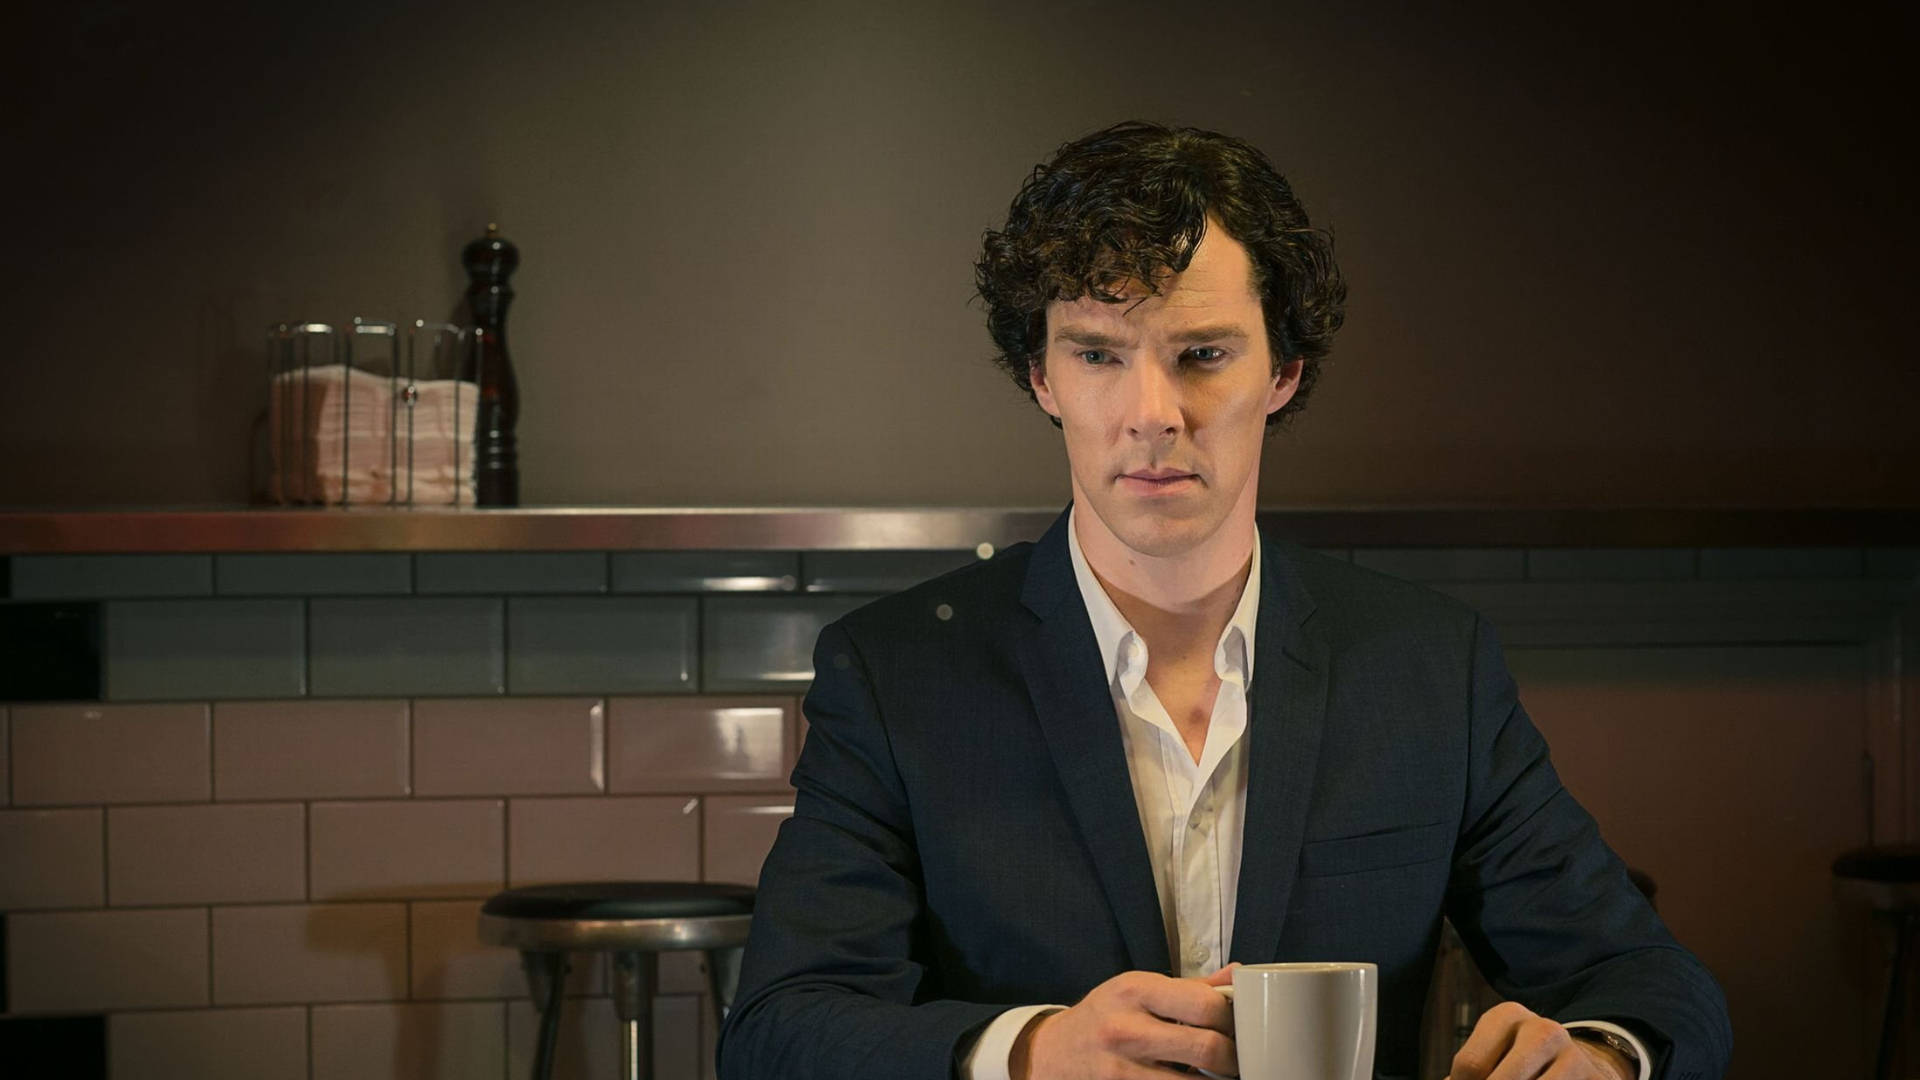 Sherlock Holding Coffee Cup Background